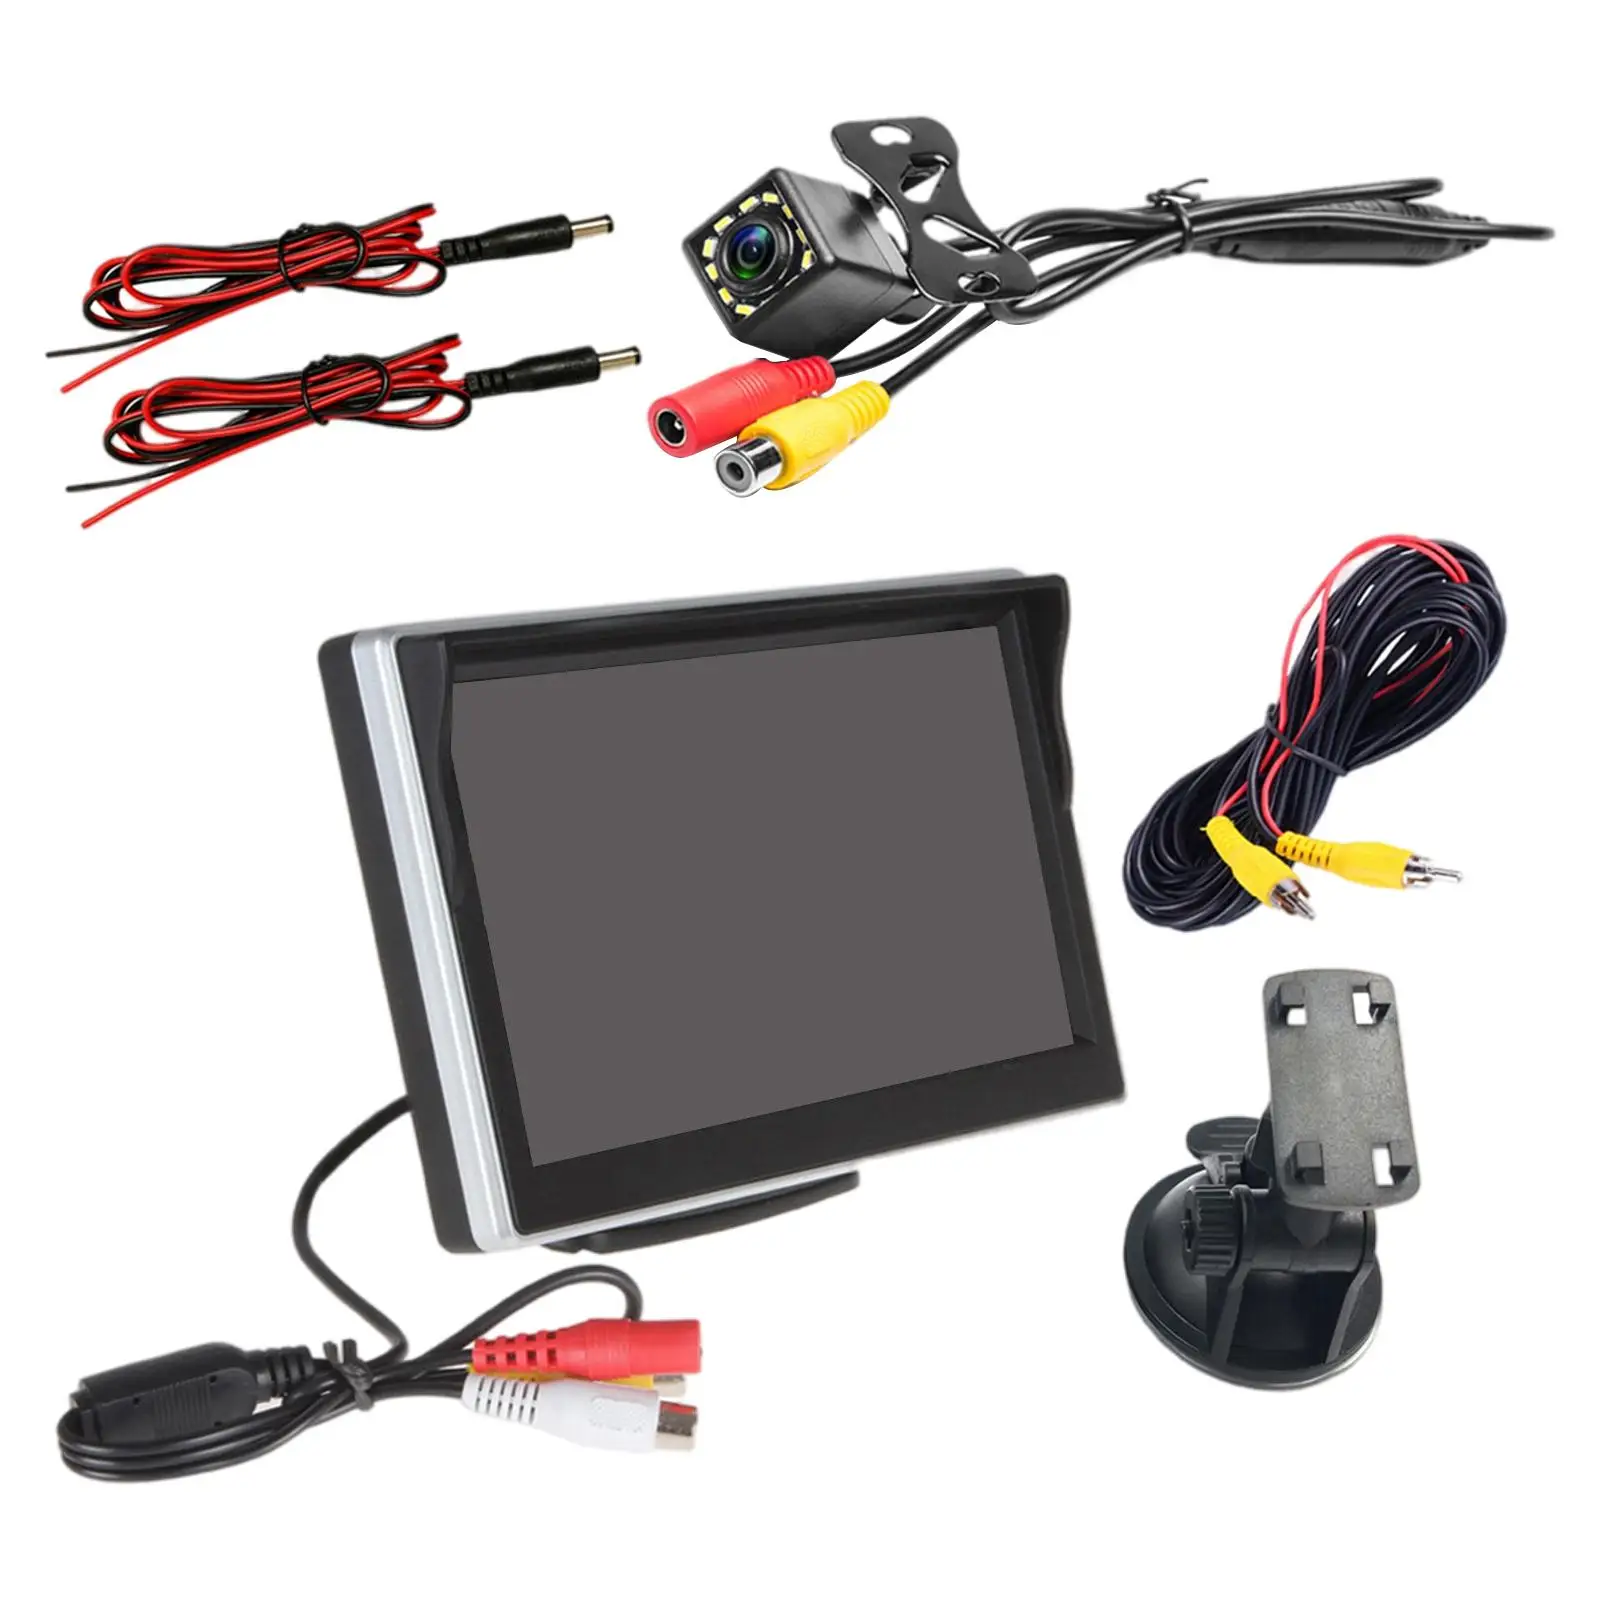 5-Inch 12 LED Car Monitor Camera Rear View Camera System for Truck Car